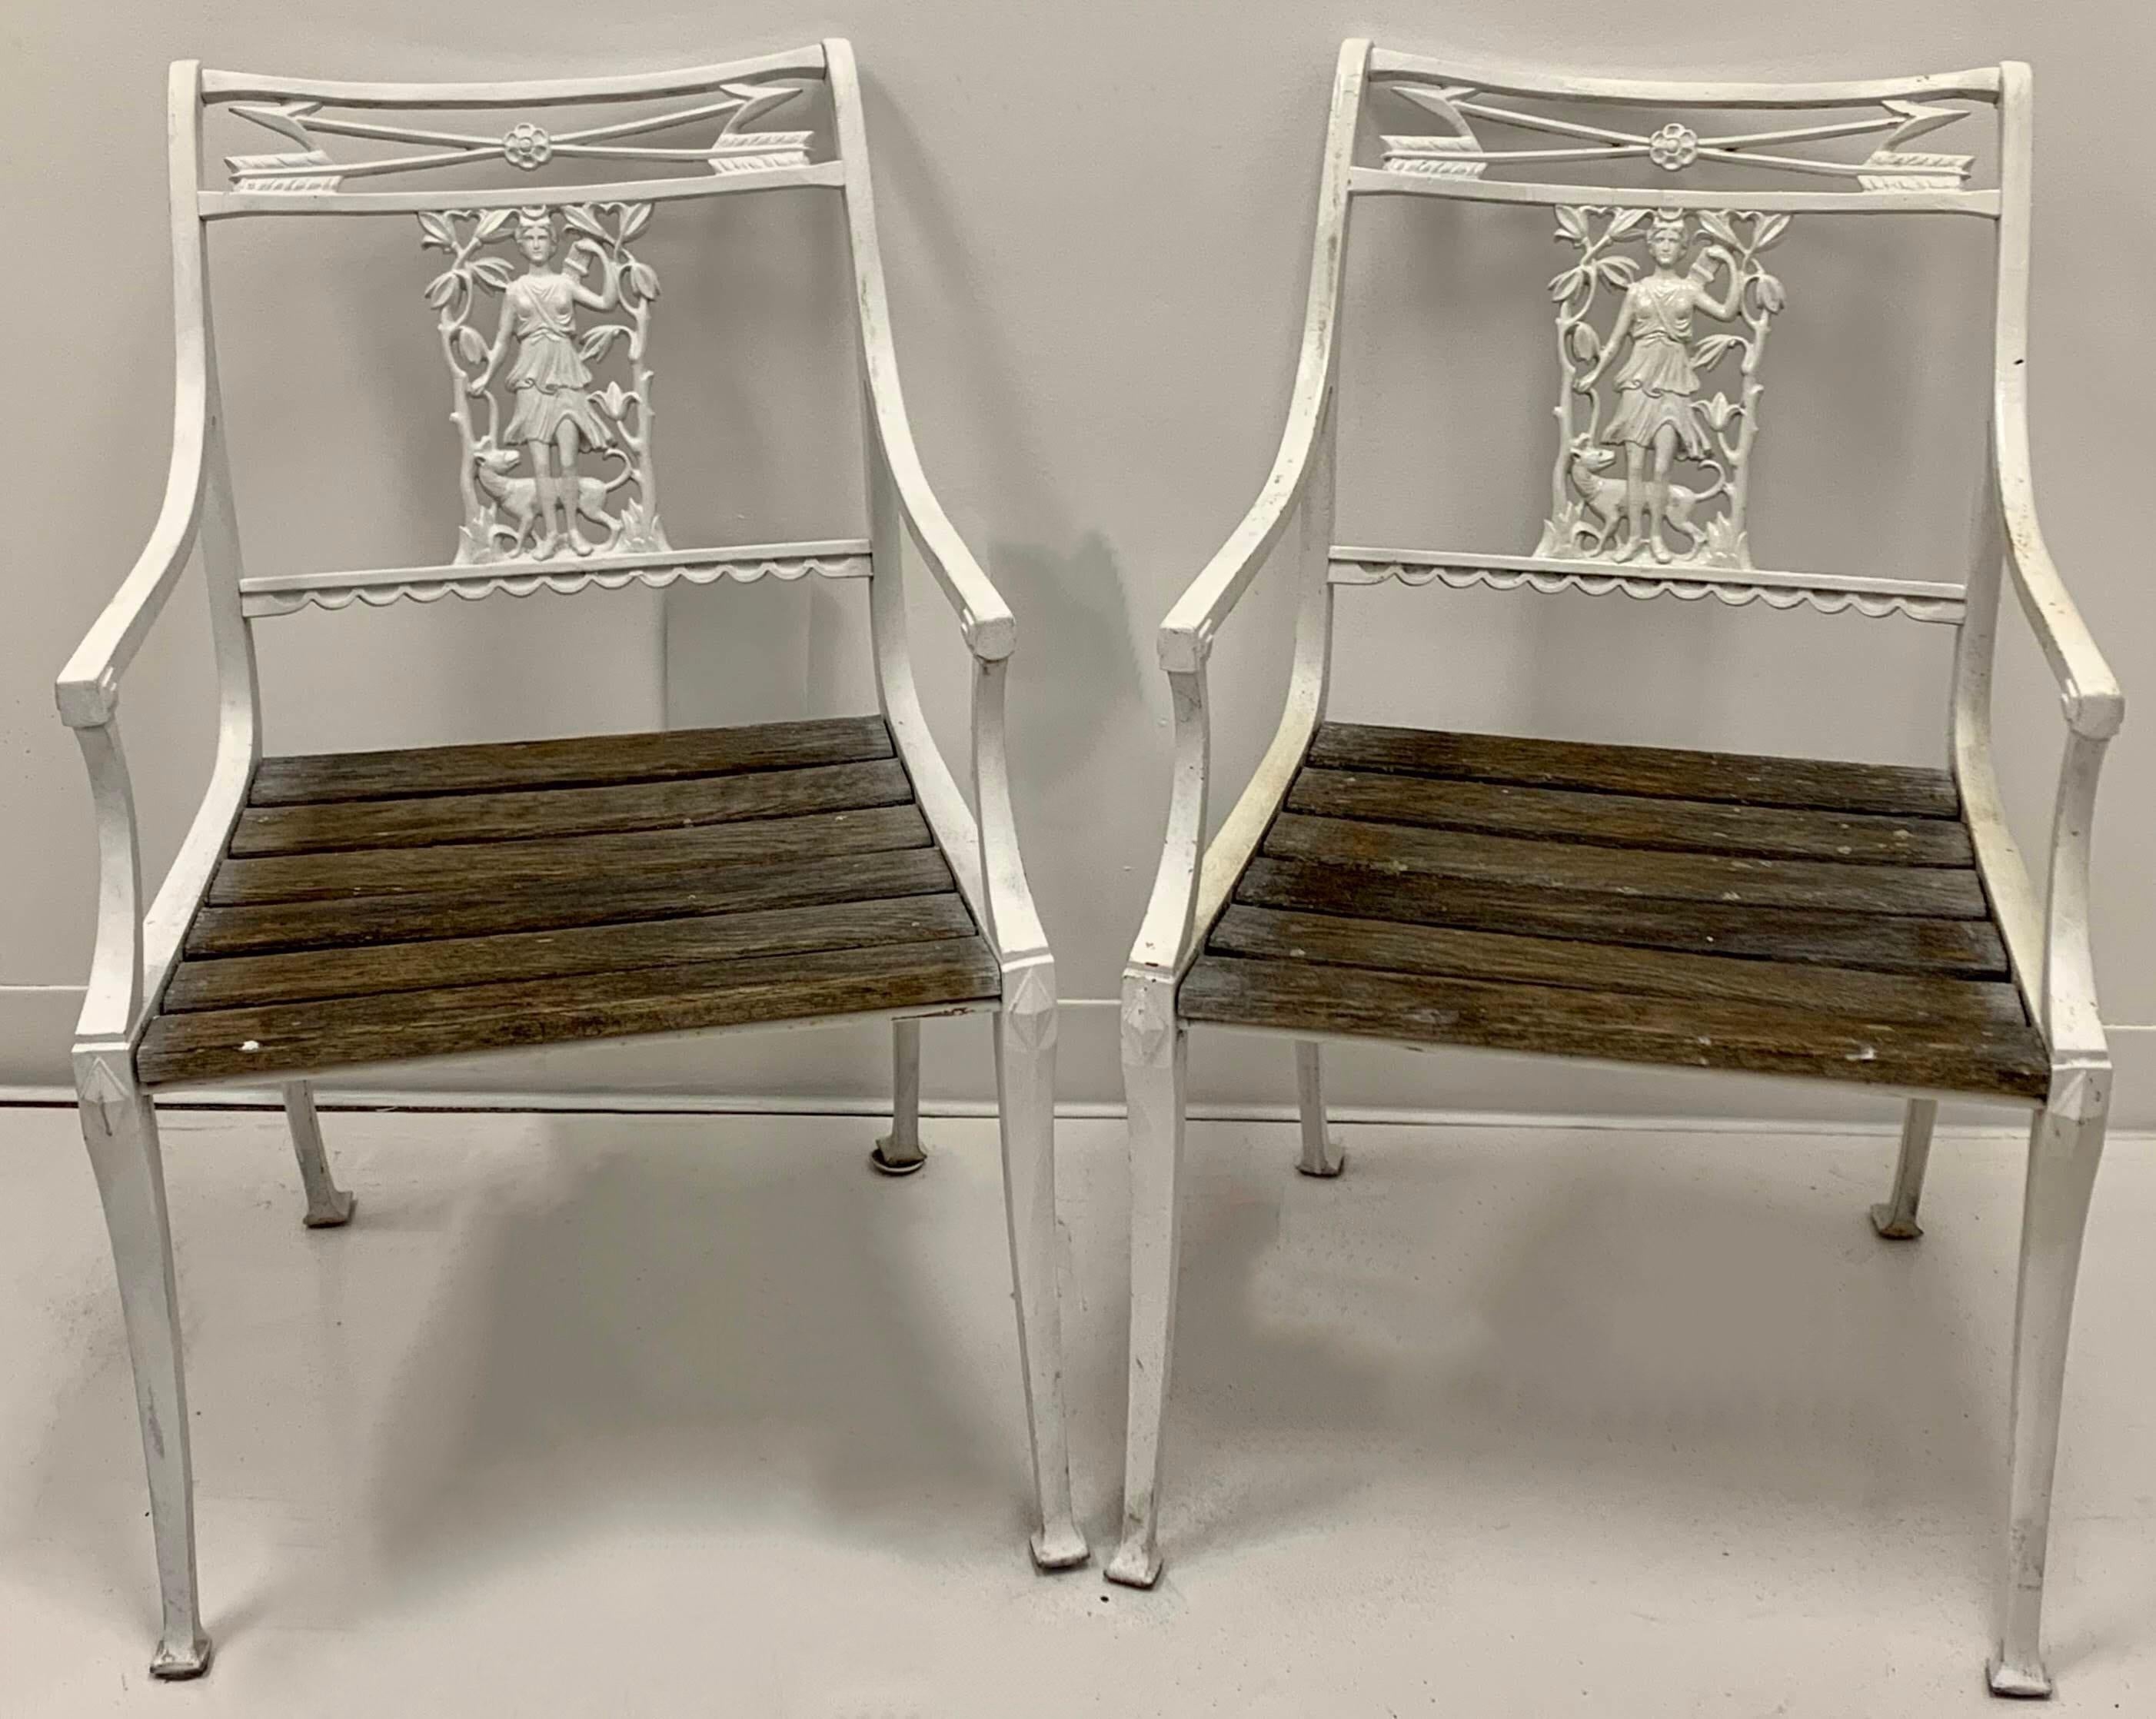 Early 20th Century Neoclassical Style Iron Molla Diana the Huntress Chairs, Pair In Good Condition For Sale In Kennesaw, GA